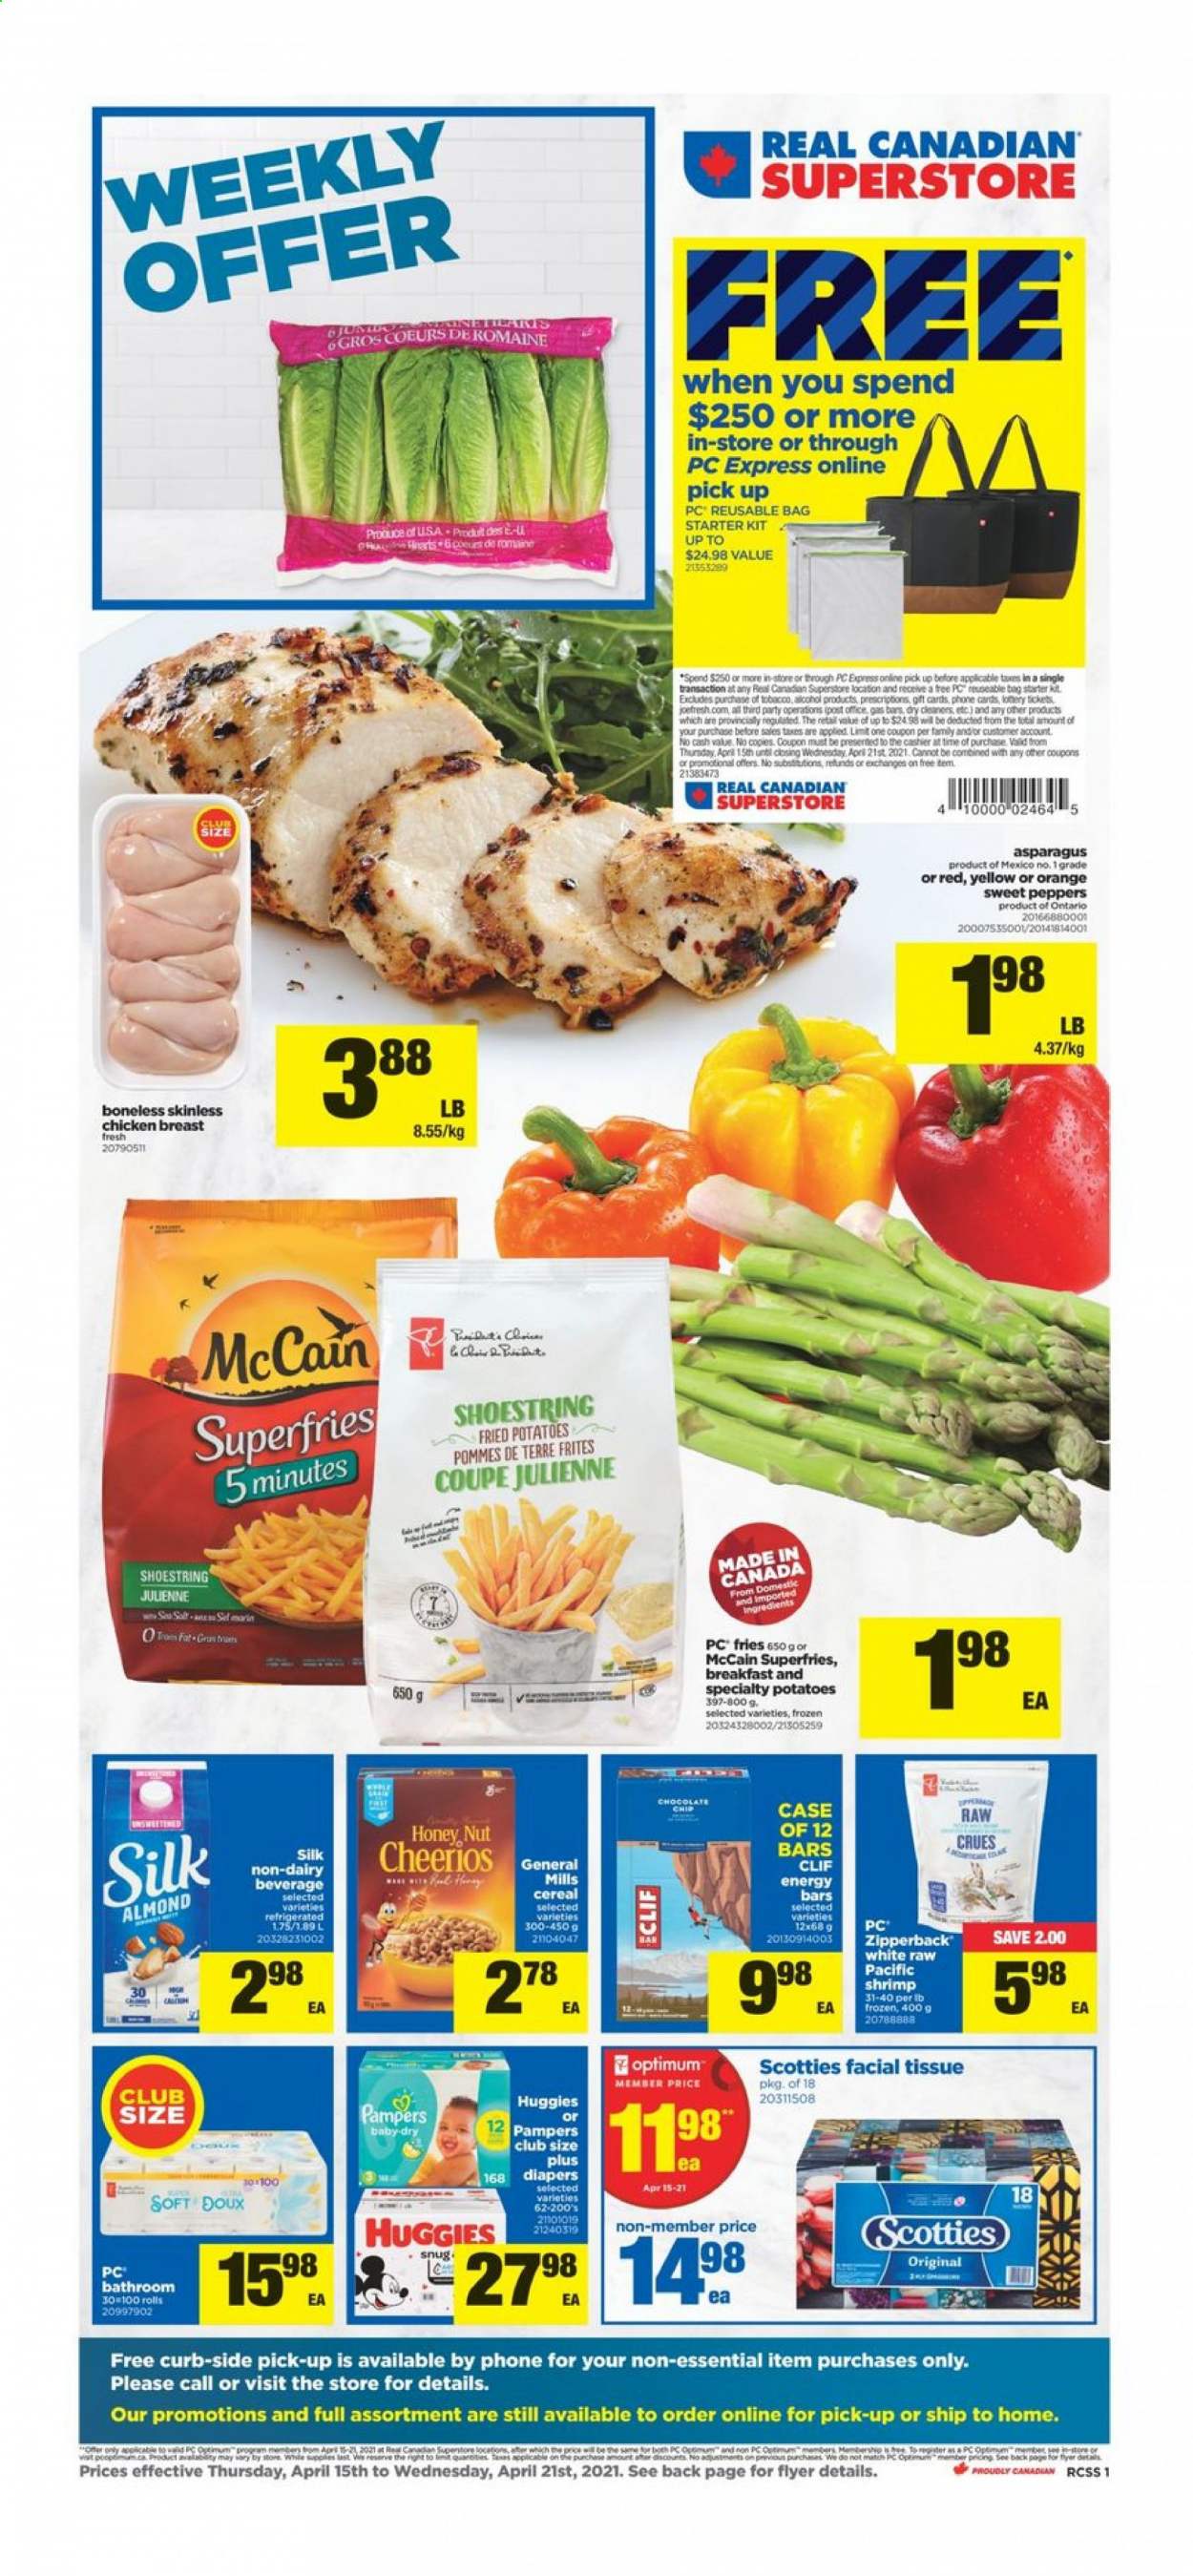 thumbnail - Circulaire Real Canadian Superstore - 15 Avril 2021 - 21 Avril 2021 - Produits soldés - pommes de terre, McCain, frites, Huggies, Pampers. Page 1.